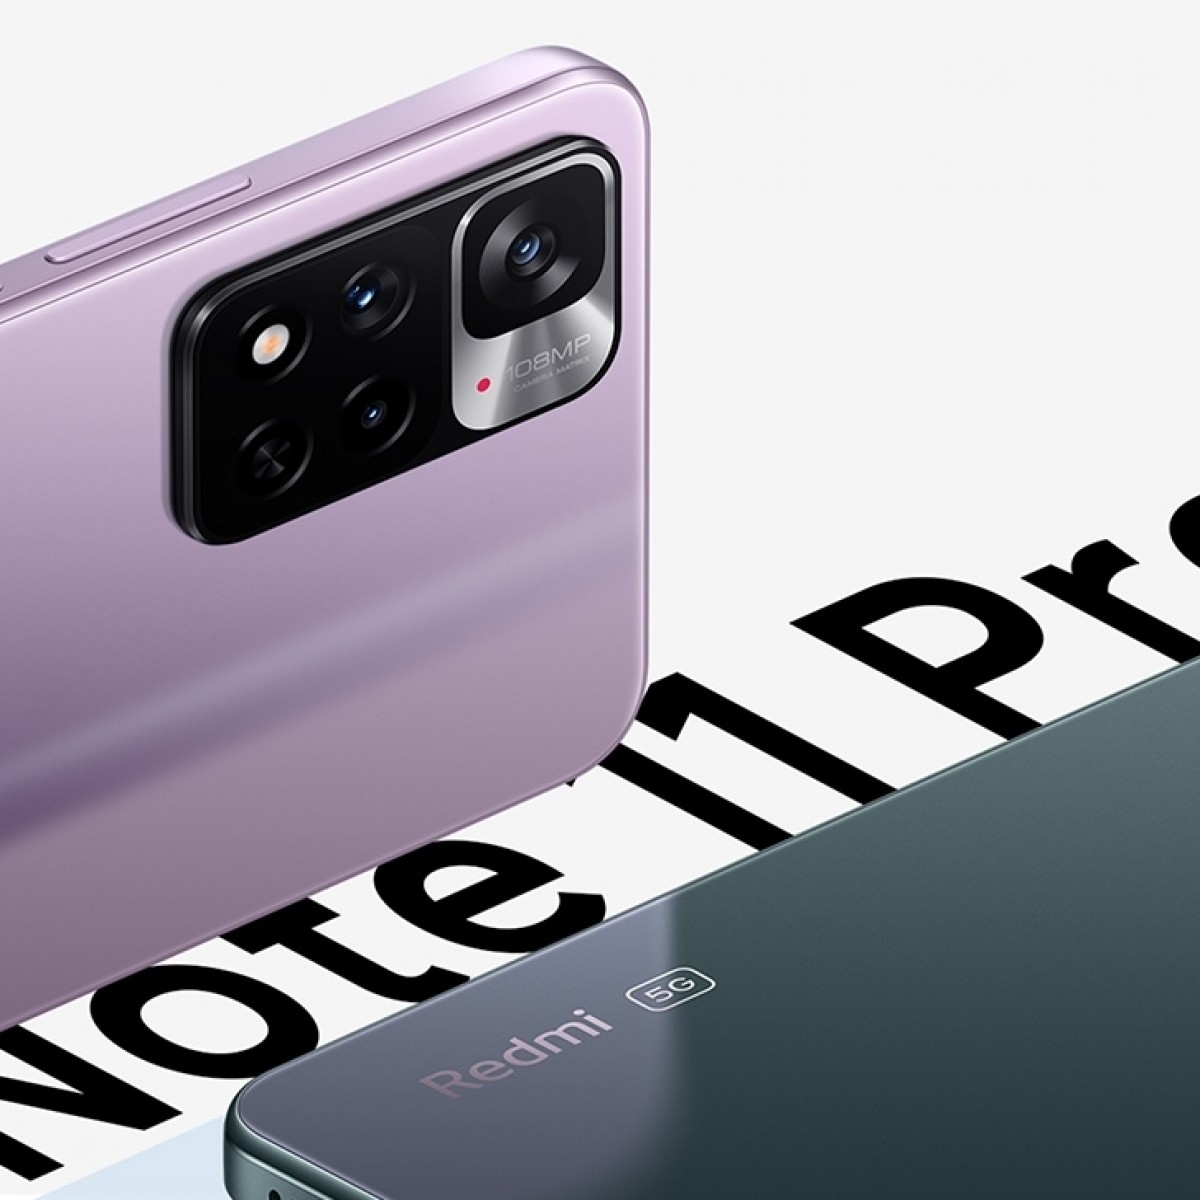 Three Redmi Note 11 phones are official, Pro+ brings 120W fast charging